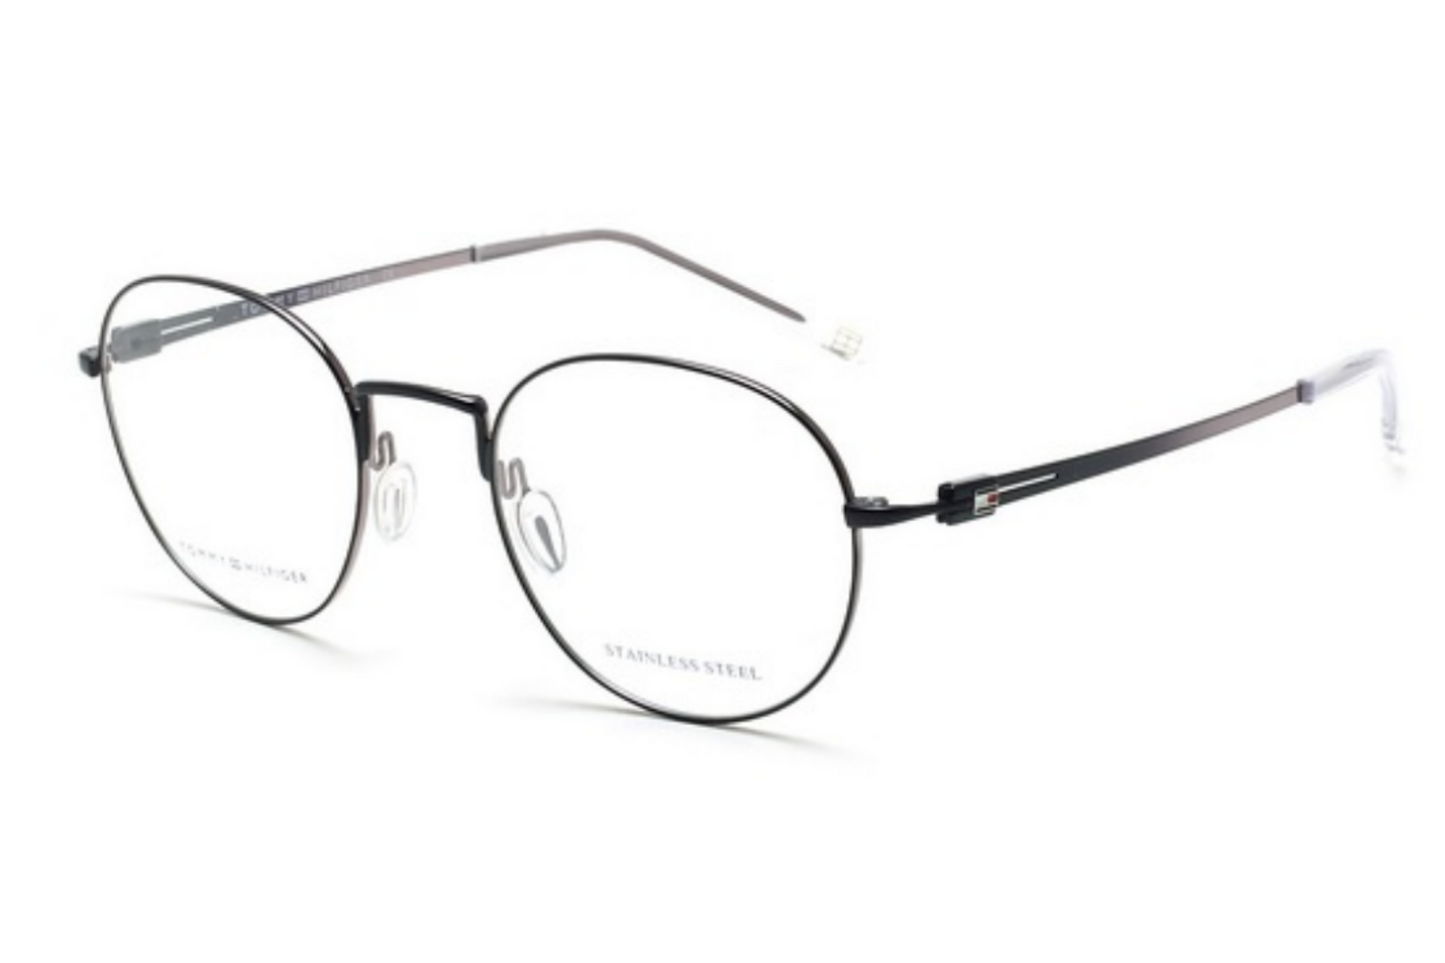 Tommy Hilfiger Frame TH6218 C3 NEW ARRIVAL